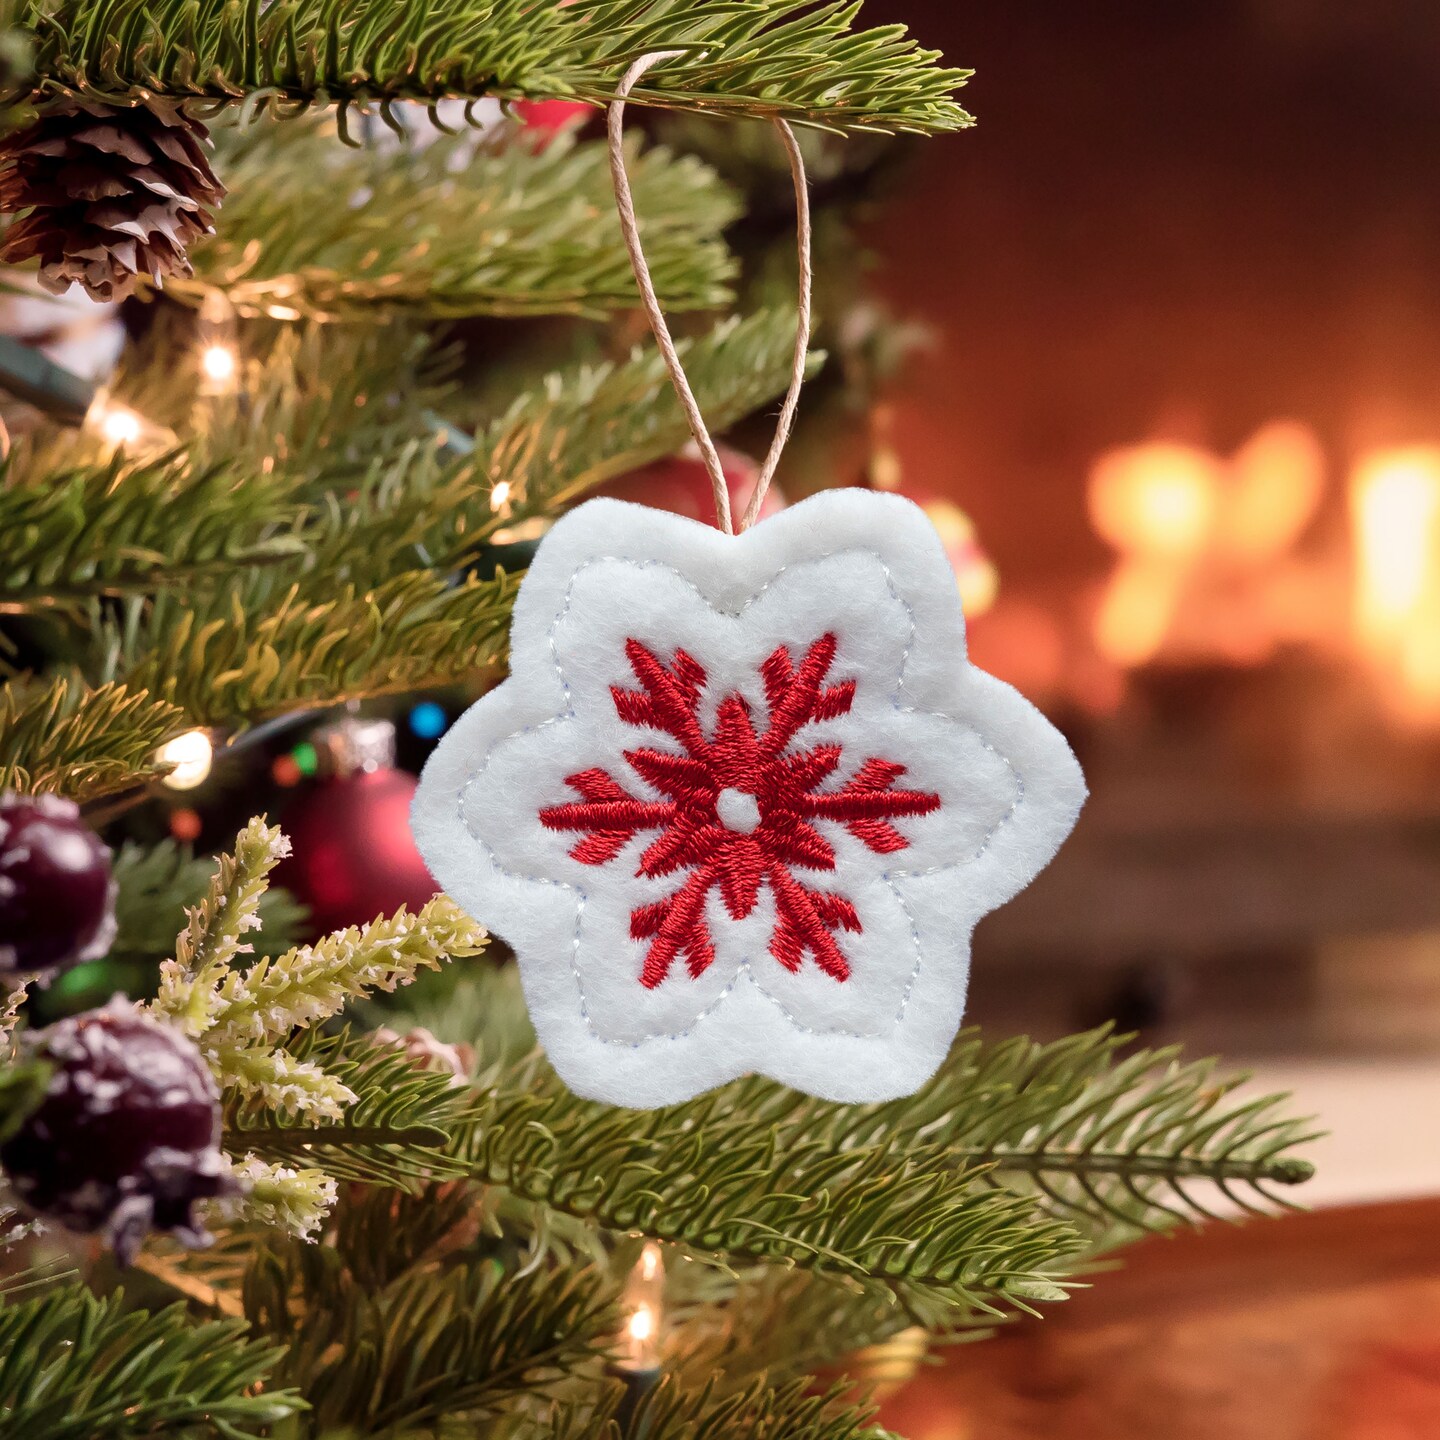 Mini Snowflake Ornaments Embroidered on White Felt With Red Thread. Sold as  a Set or Individually. Winter Wonderland Snowflake Gift Tags. 